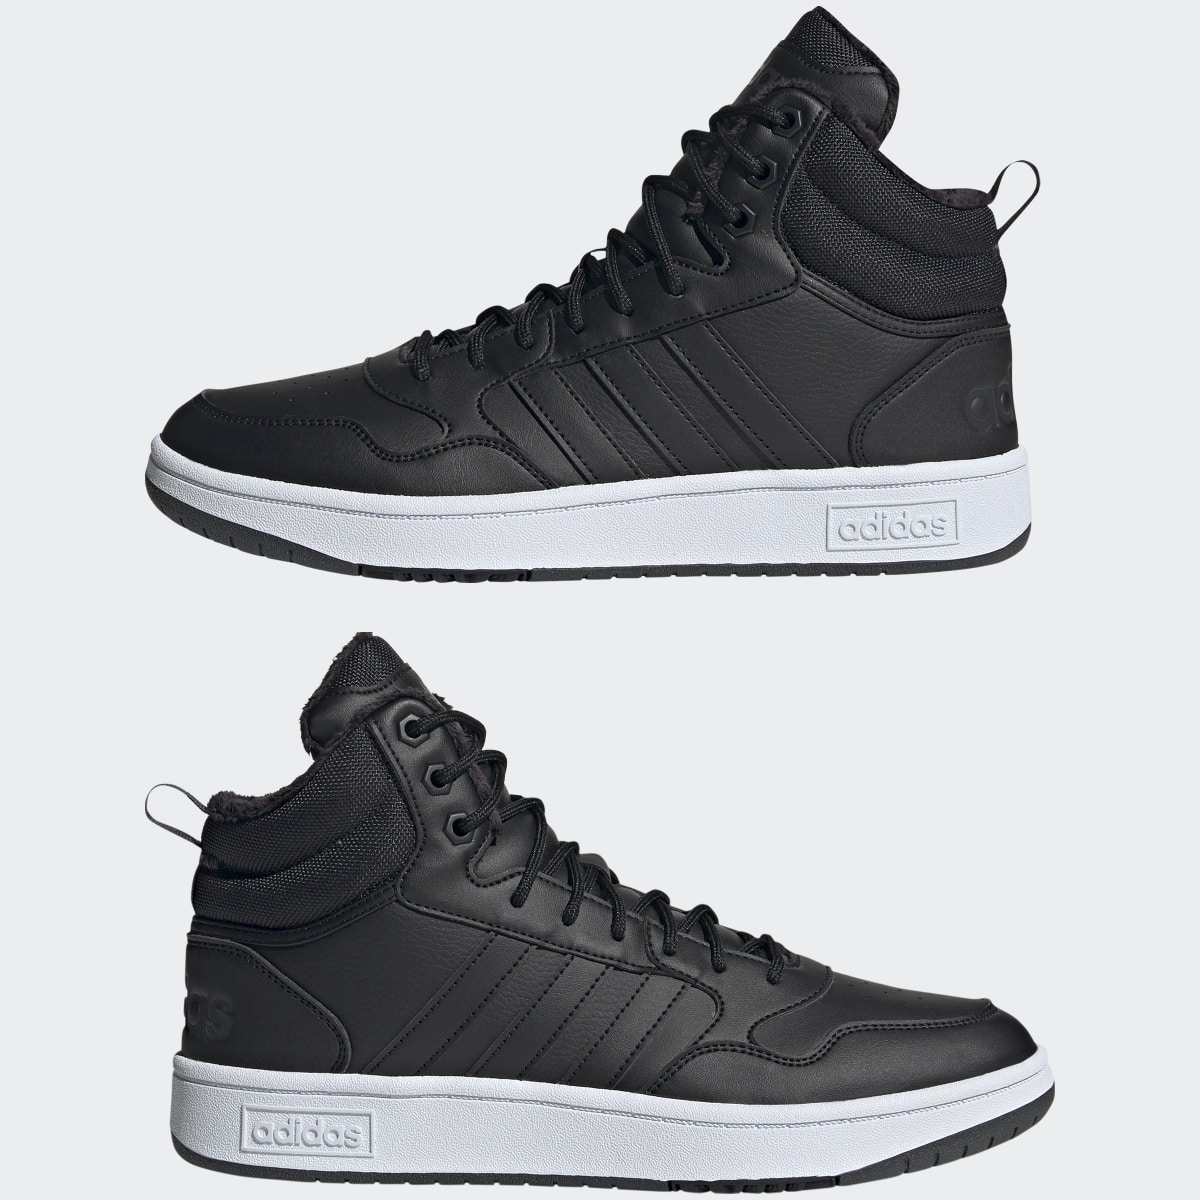 Adidas Hoops 3.0 Mid Classic Fur Lining Winterized Shoes. 8